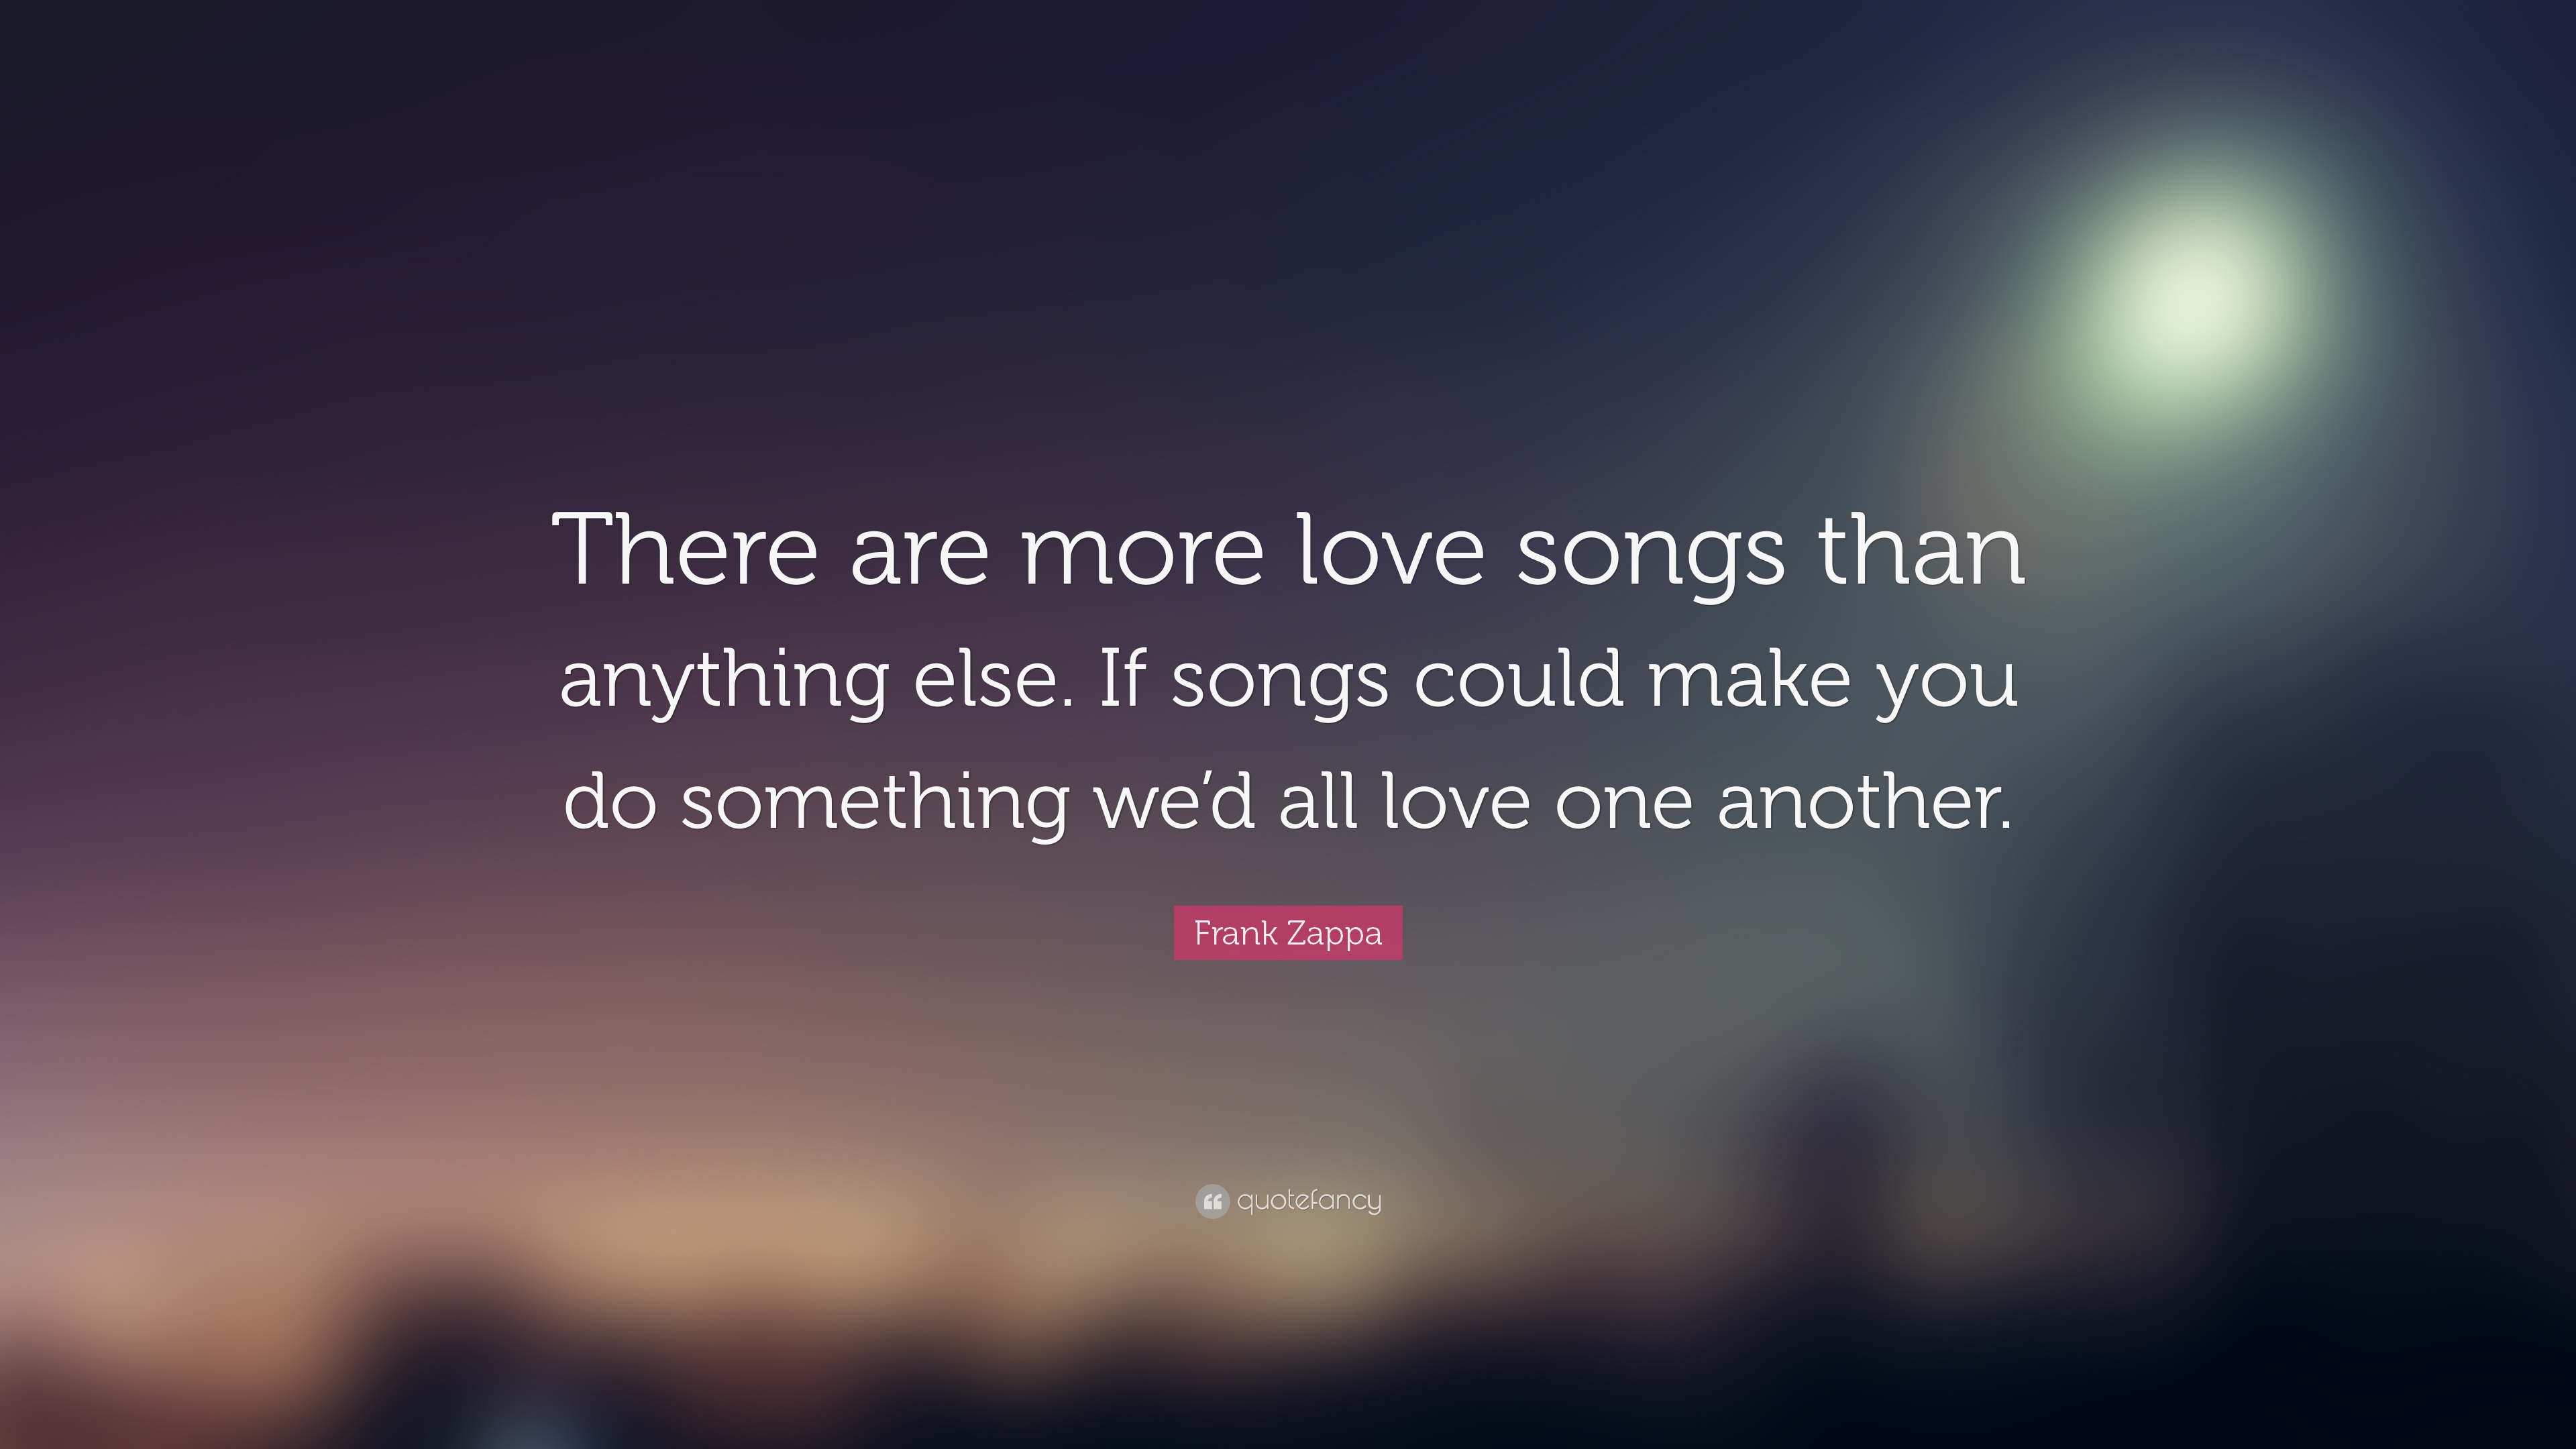 5 Frank Zappa Quotes About Love